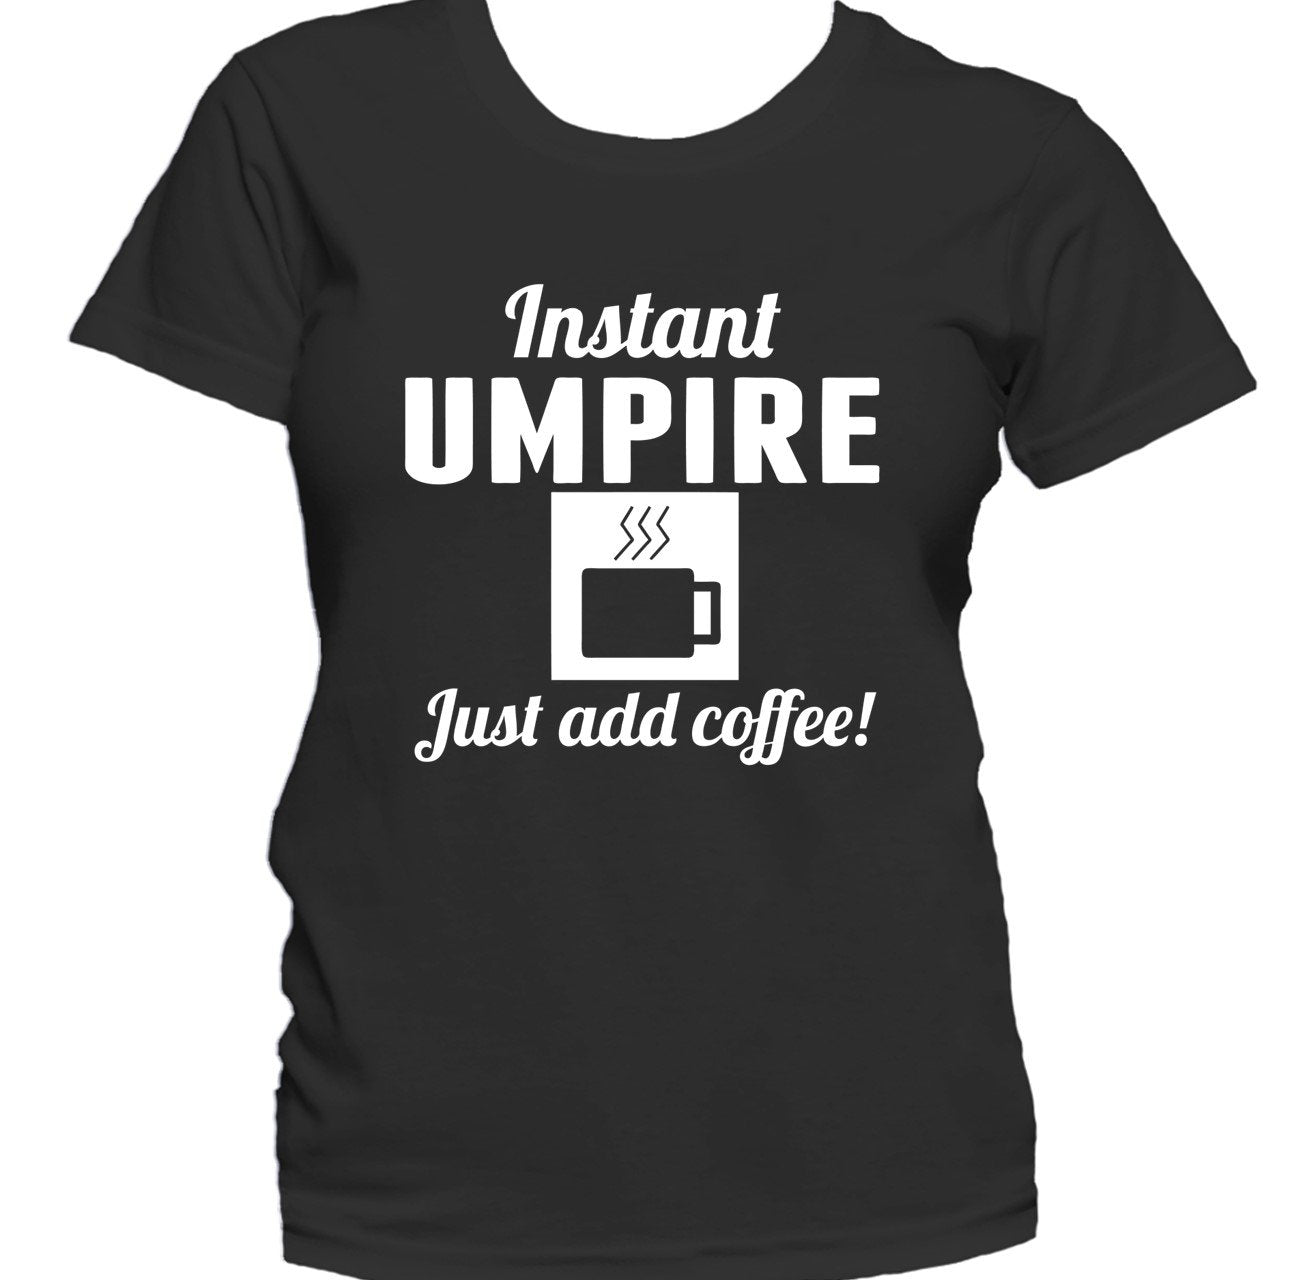 Really Awesome Shirts Instant Umpire Just Add Coffee Funny Baseball Women's T-Shirt Women's Small / Black